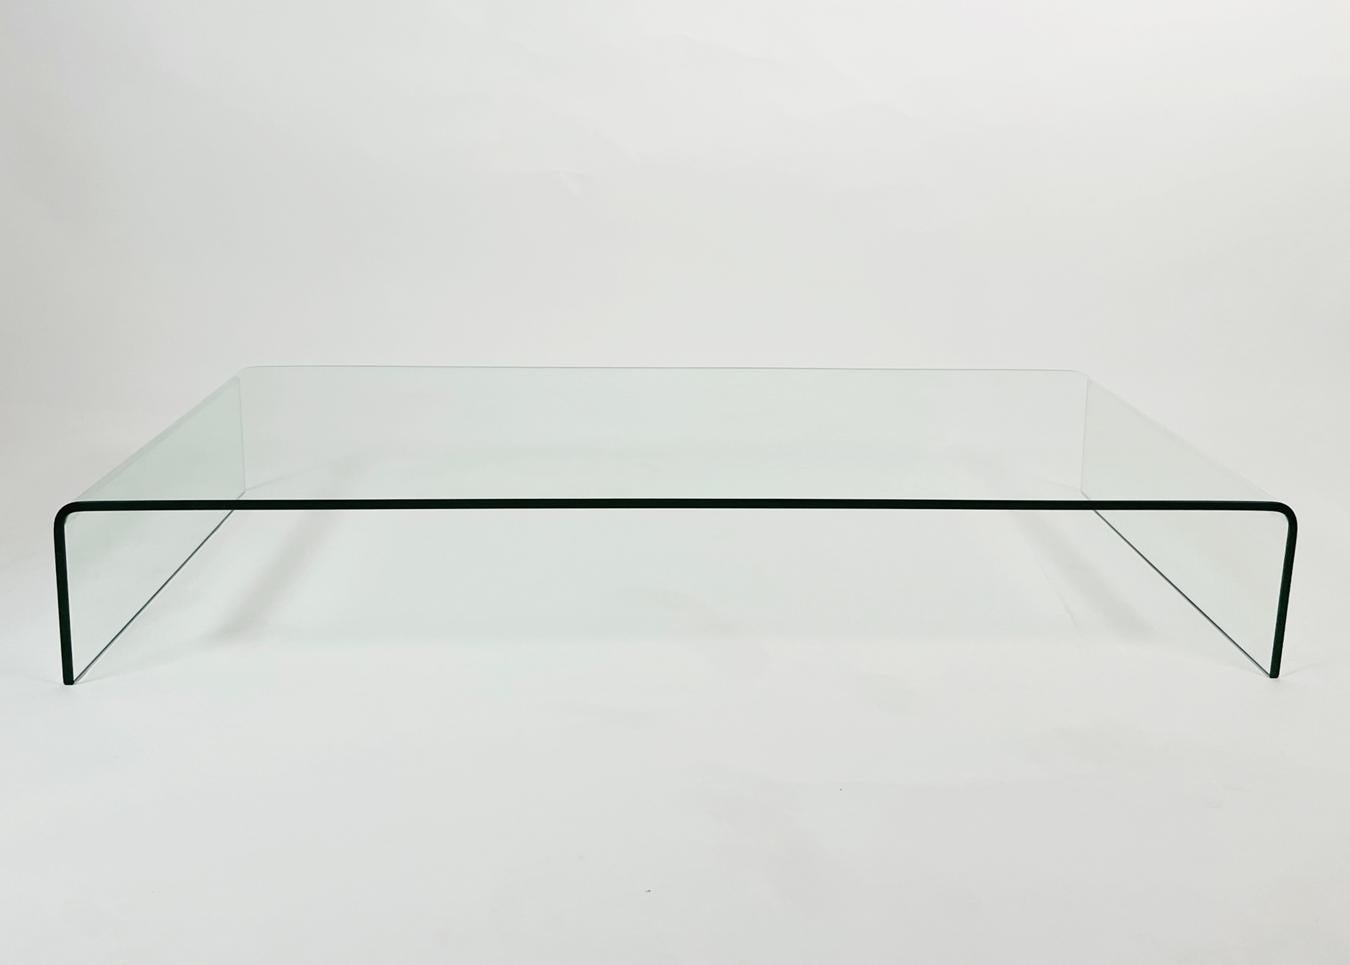 Introducing our stunning Waterfall Coffee Table in Solid Glass. This exquisite piece of furniture is crafted from high-quality glass, providing a sleek and modern look to any living room. The table features curved edges that create a cascading